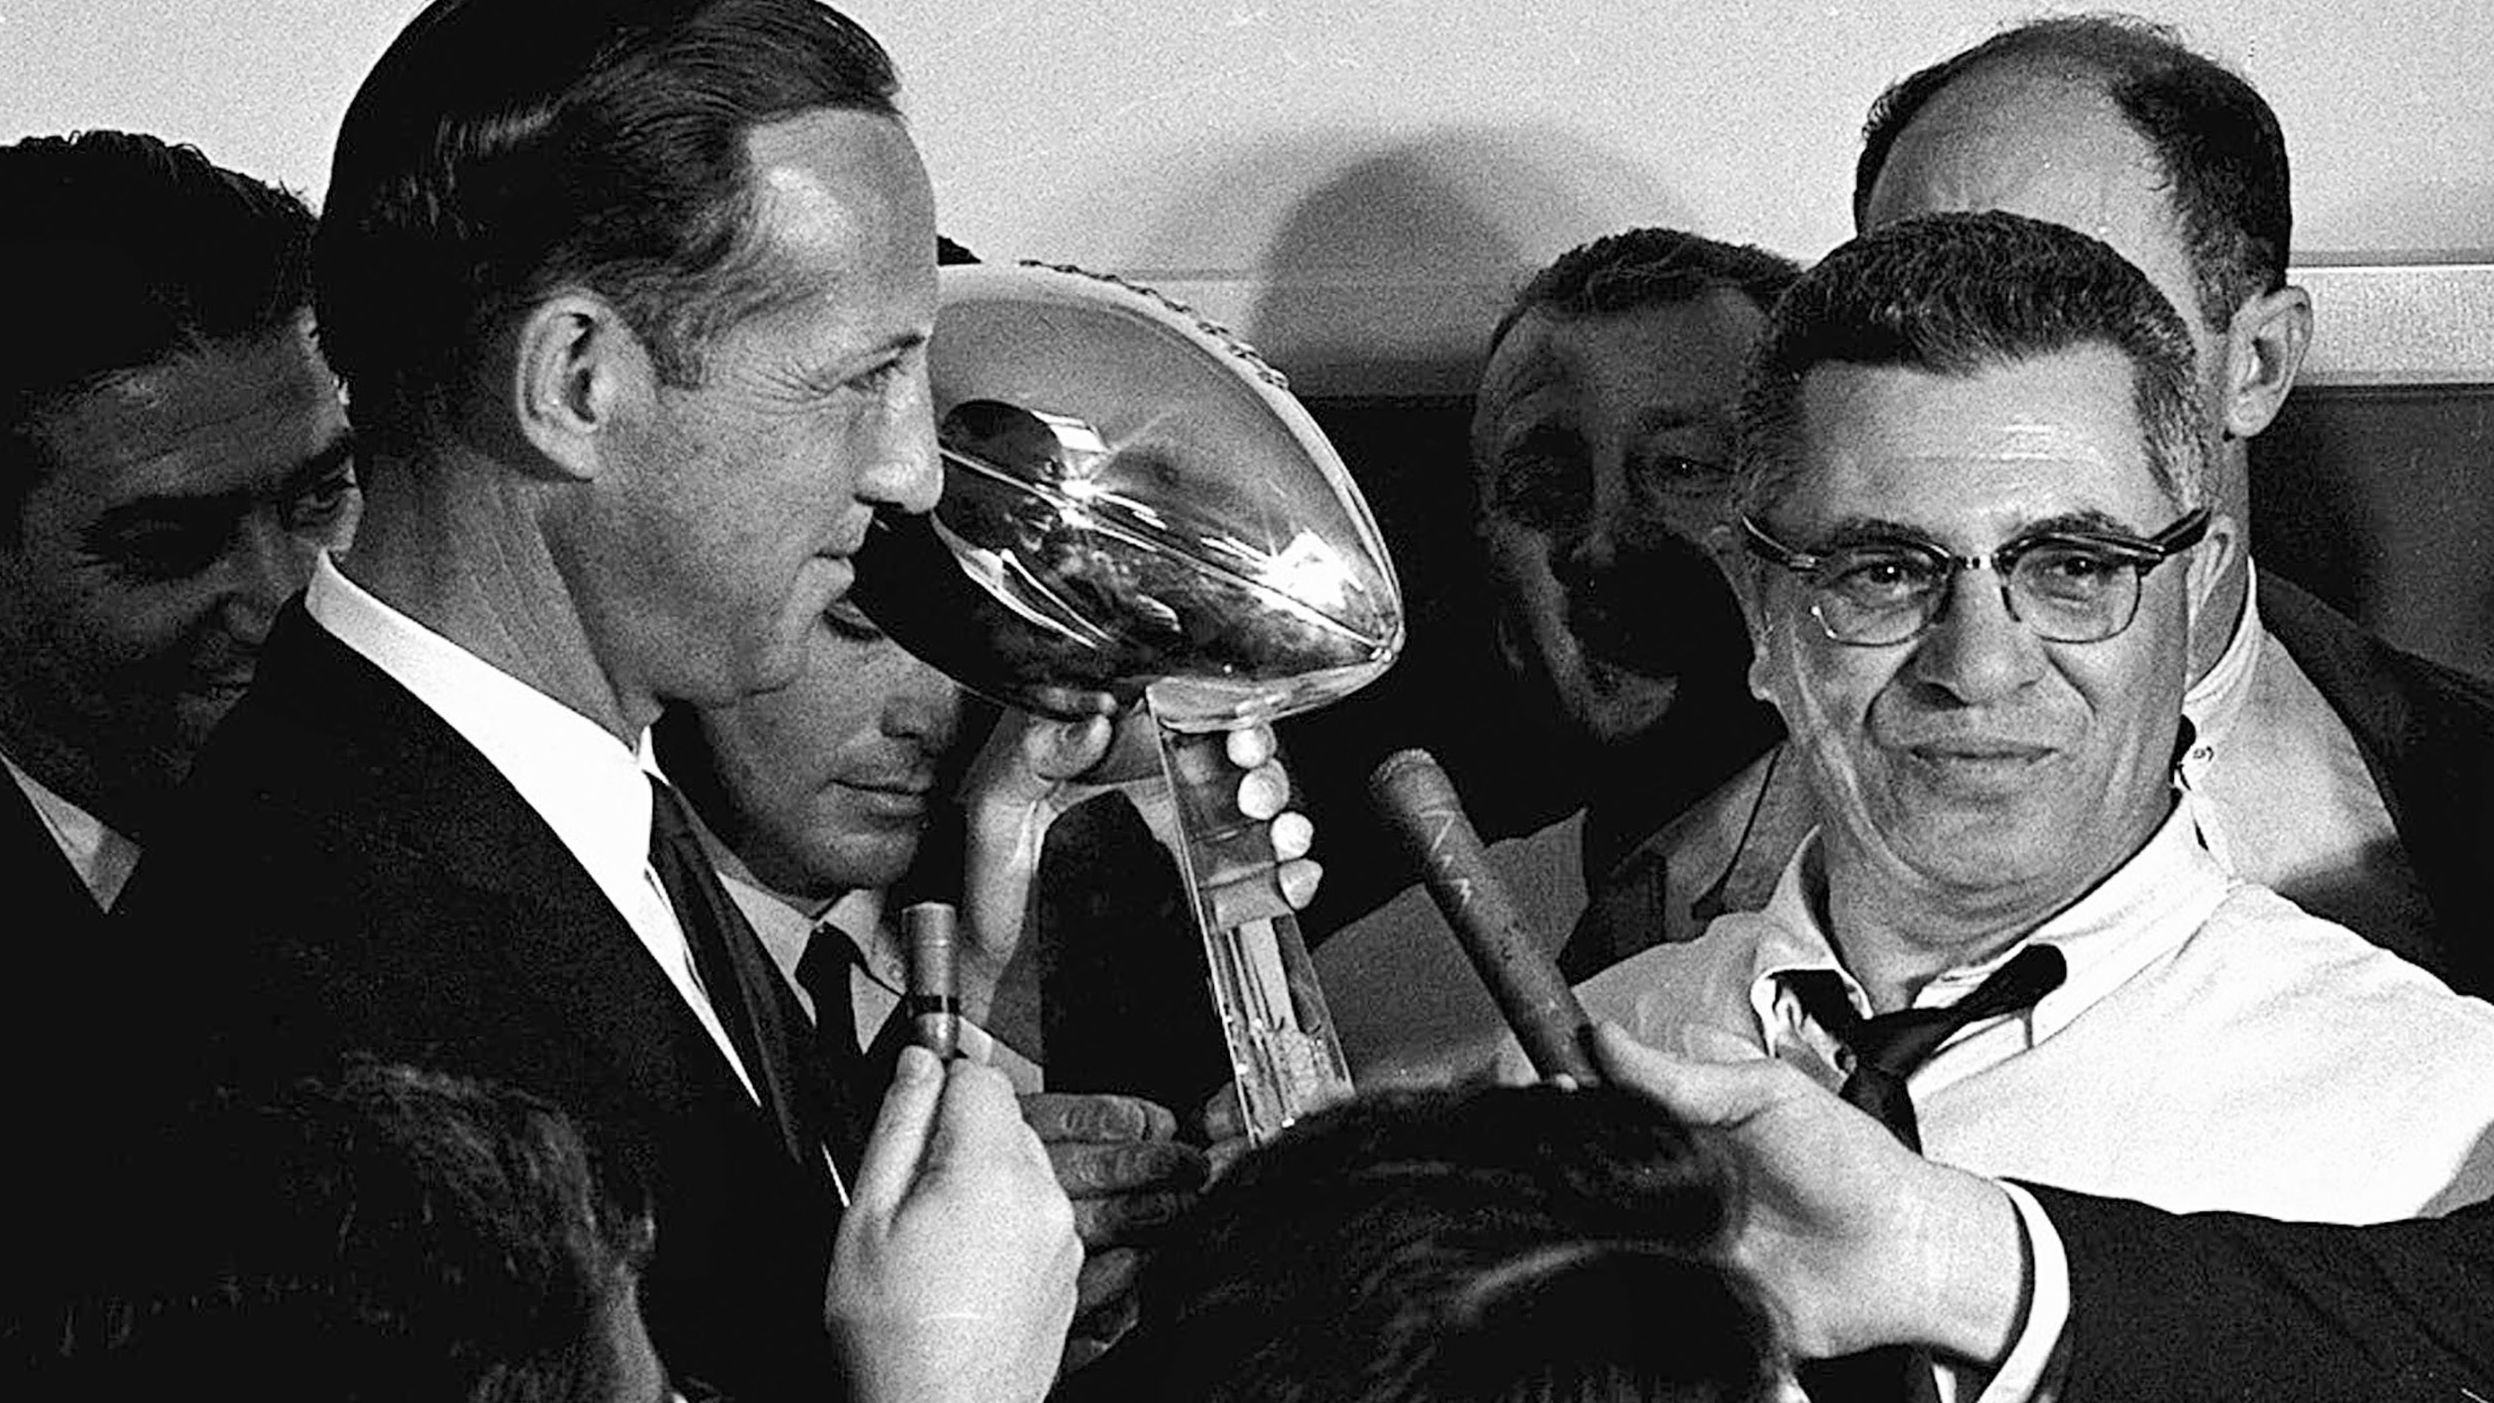 NFL commissioner Pete Rozelle, left, presents the championship trophy to Packers head coach Vince Lombardi after the game. The trophy was renamed the Vince Lombardi Trophy after the coach's death in 1970.